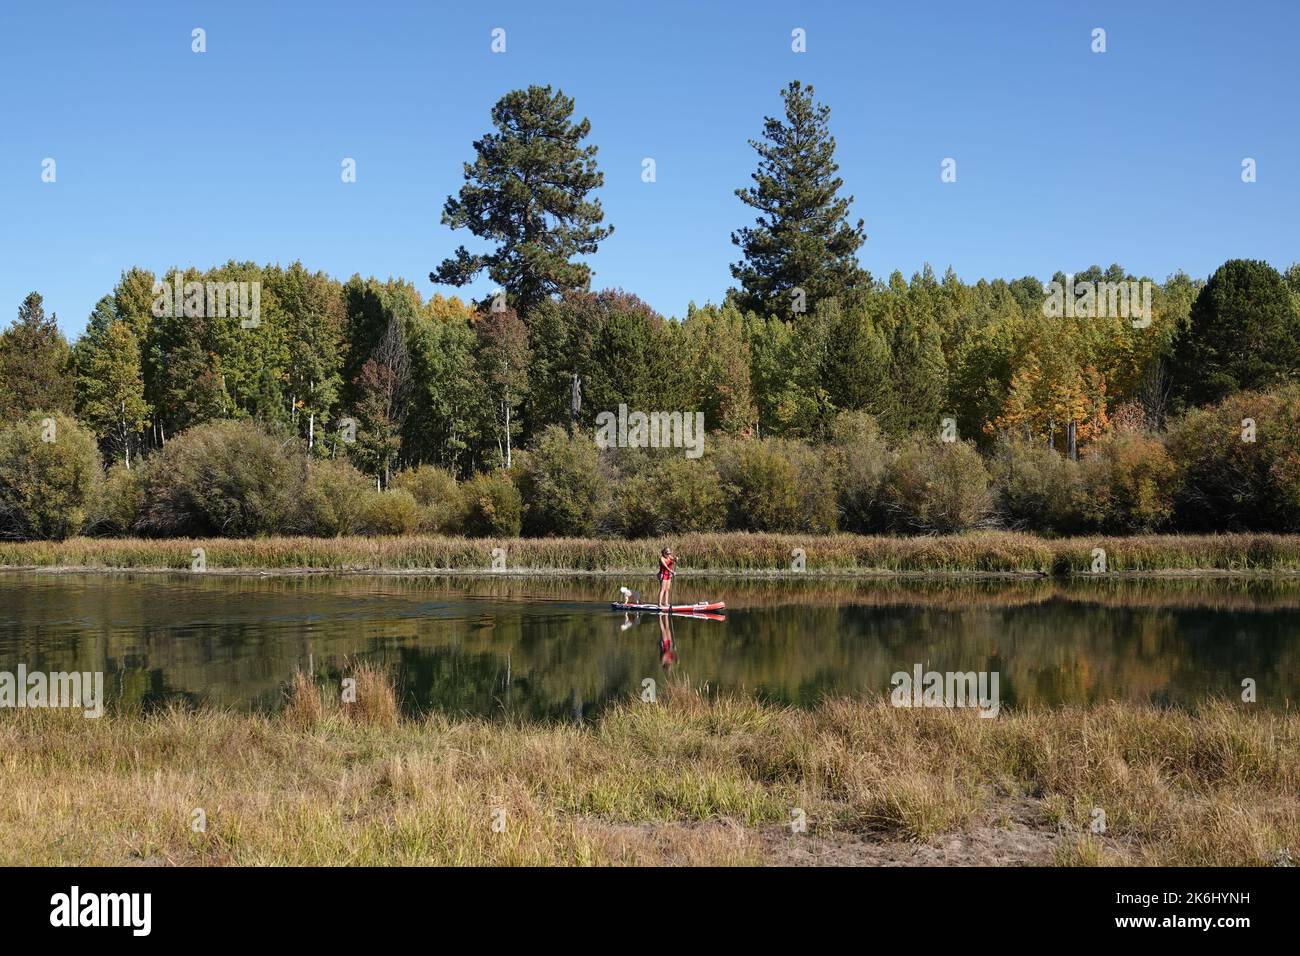 Stand-up paddleboarding is popular on the Deschutes River near Bend, Oregon, especially in the autumn when the aspen trees along the river begin to tu Stock Photo